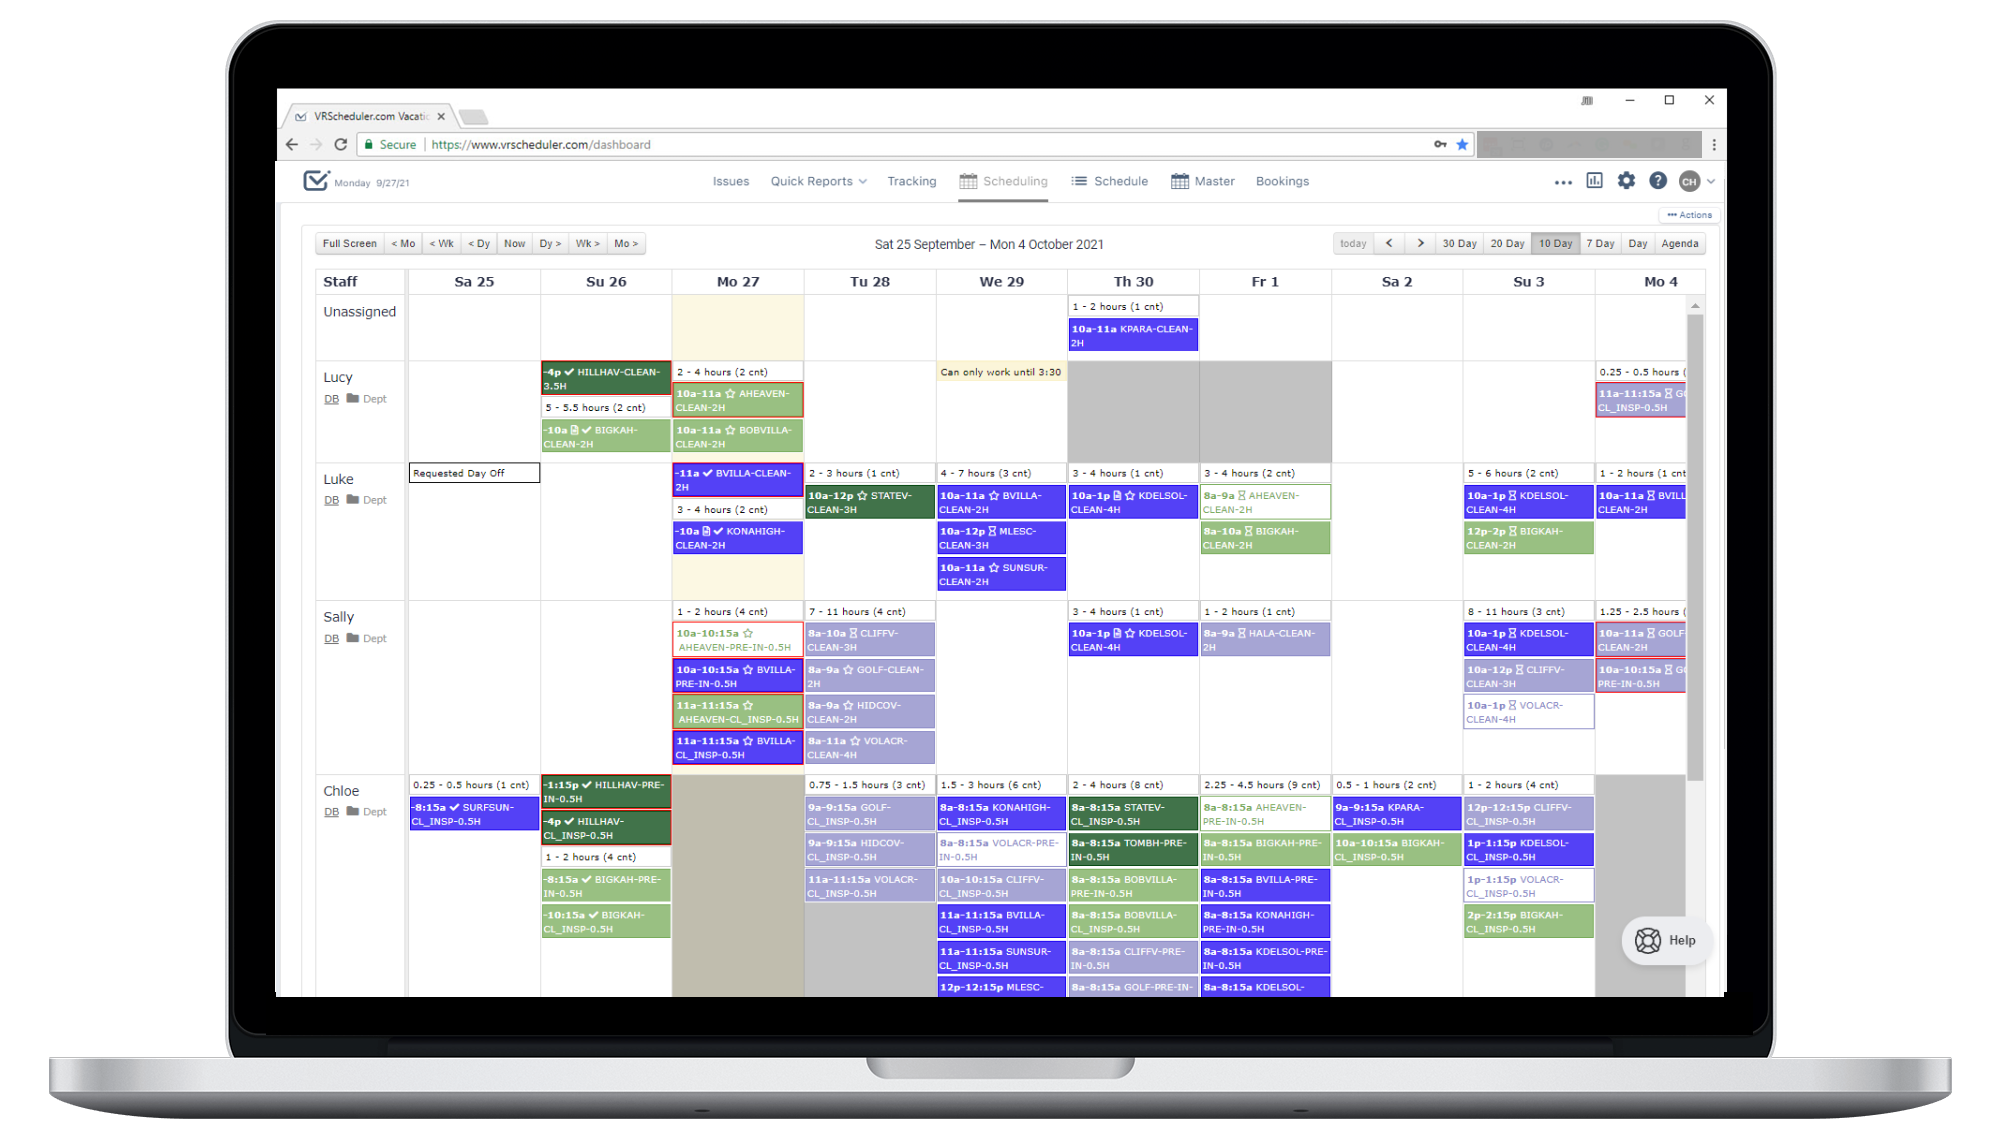 Image of Operto Teams dashboard showing automated task scheduling and management